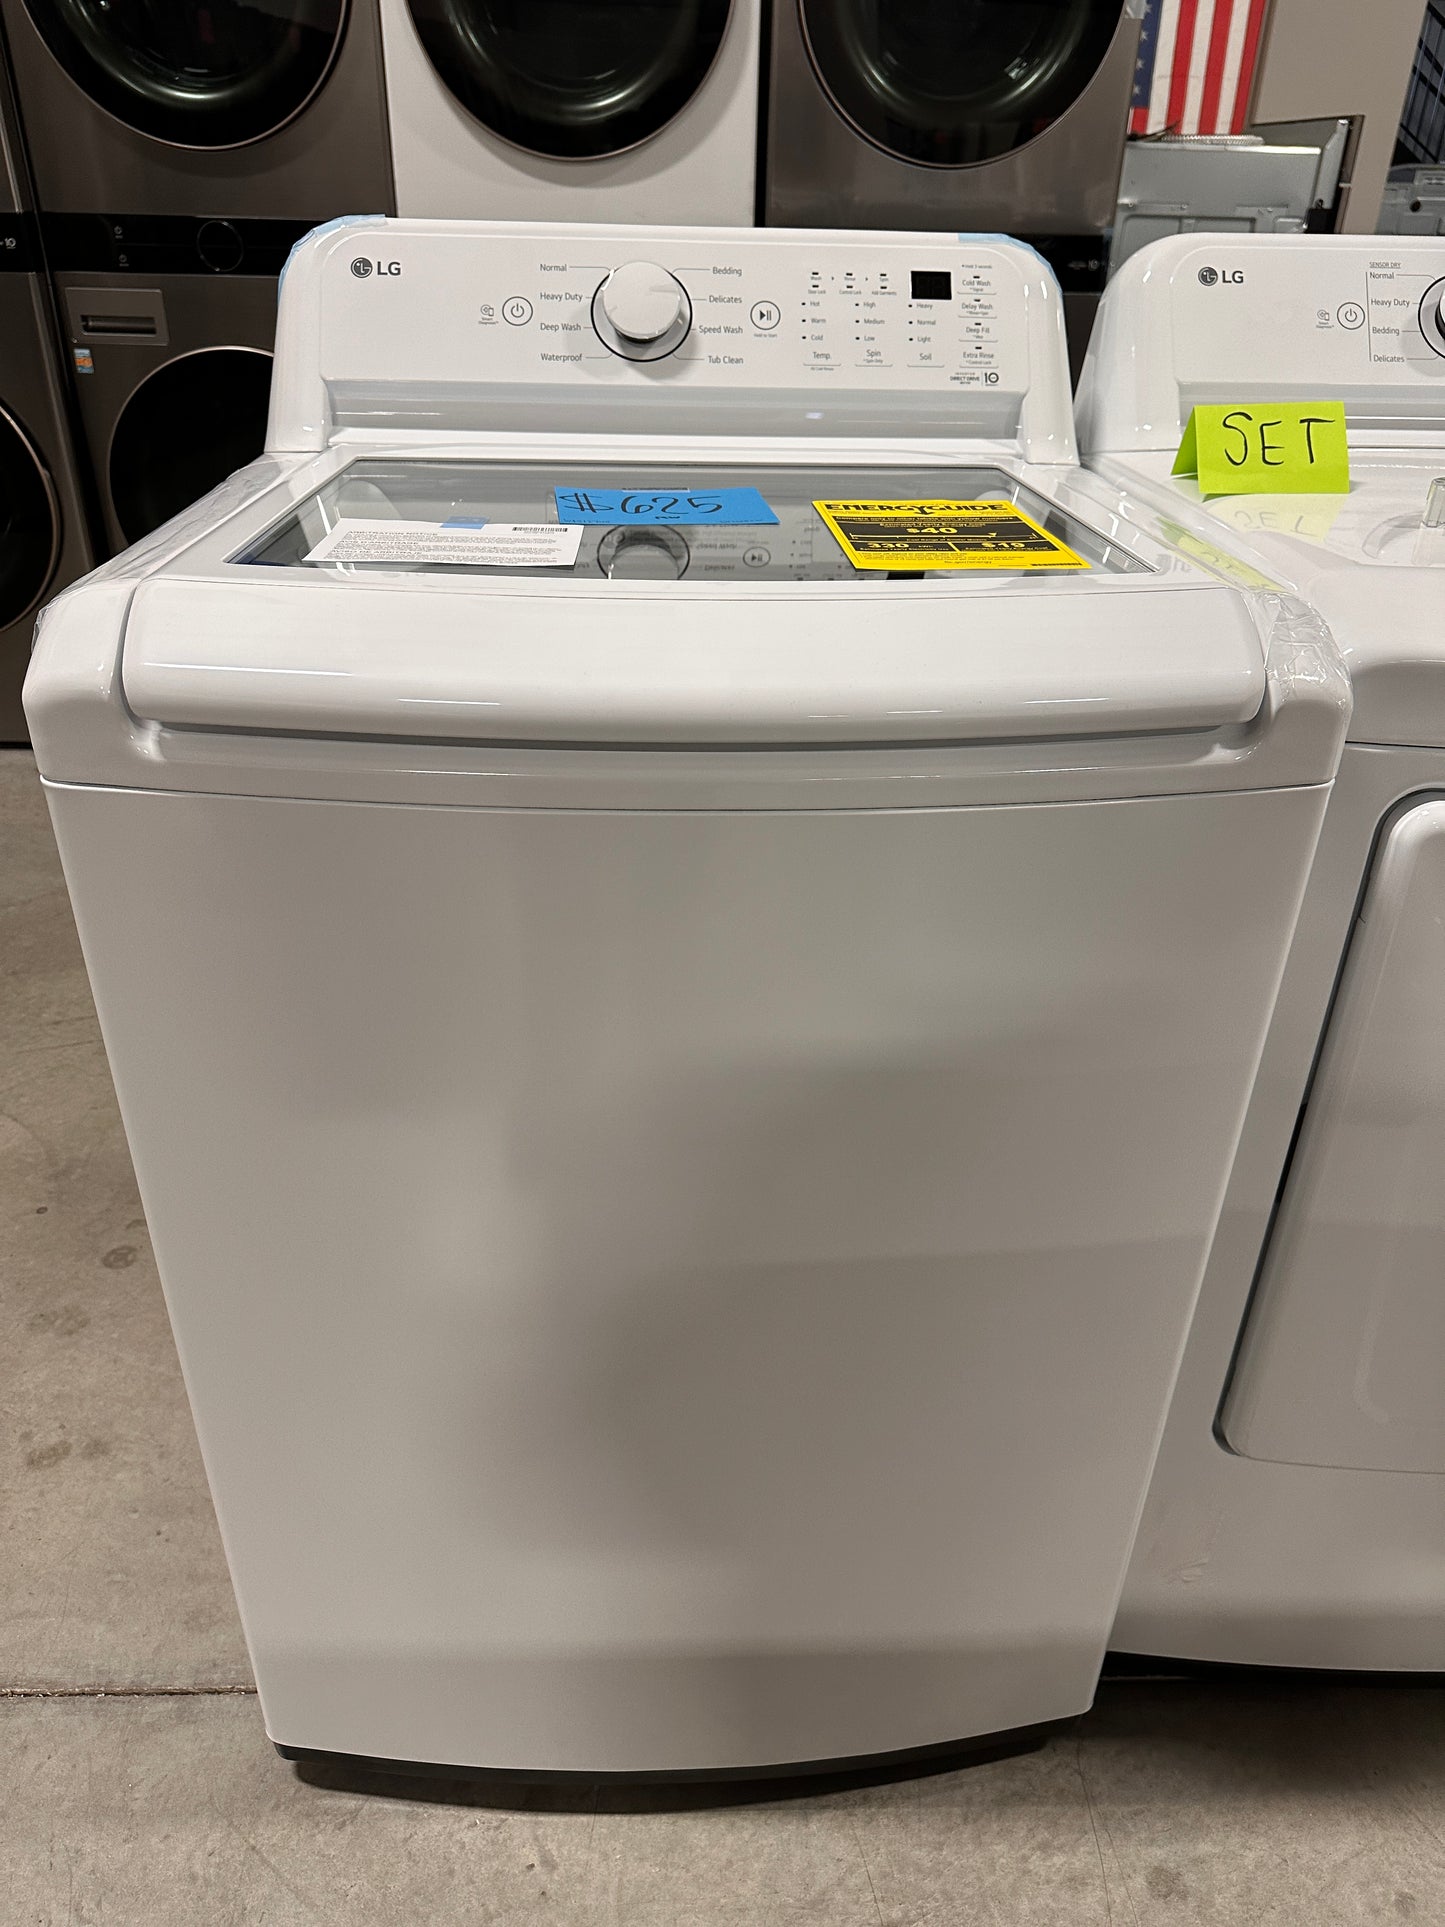 GREAT NEW LG TOP LOADING WASHING MACHINE - WAS12745